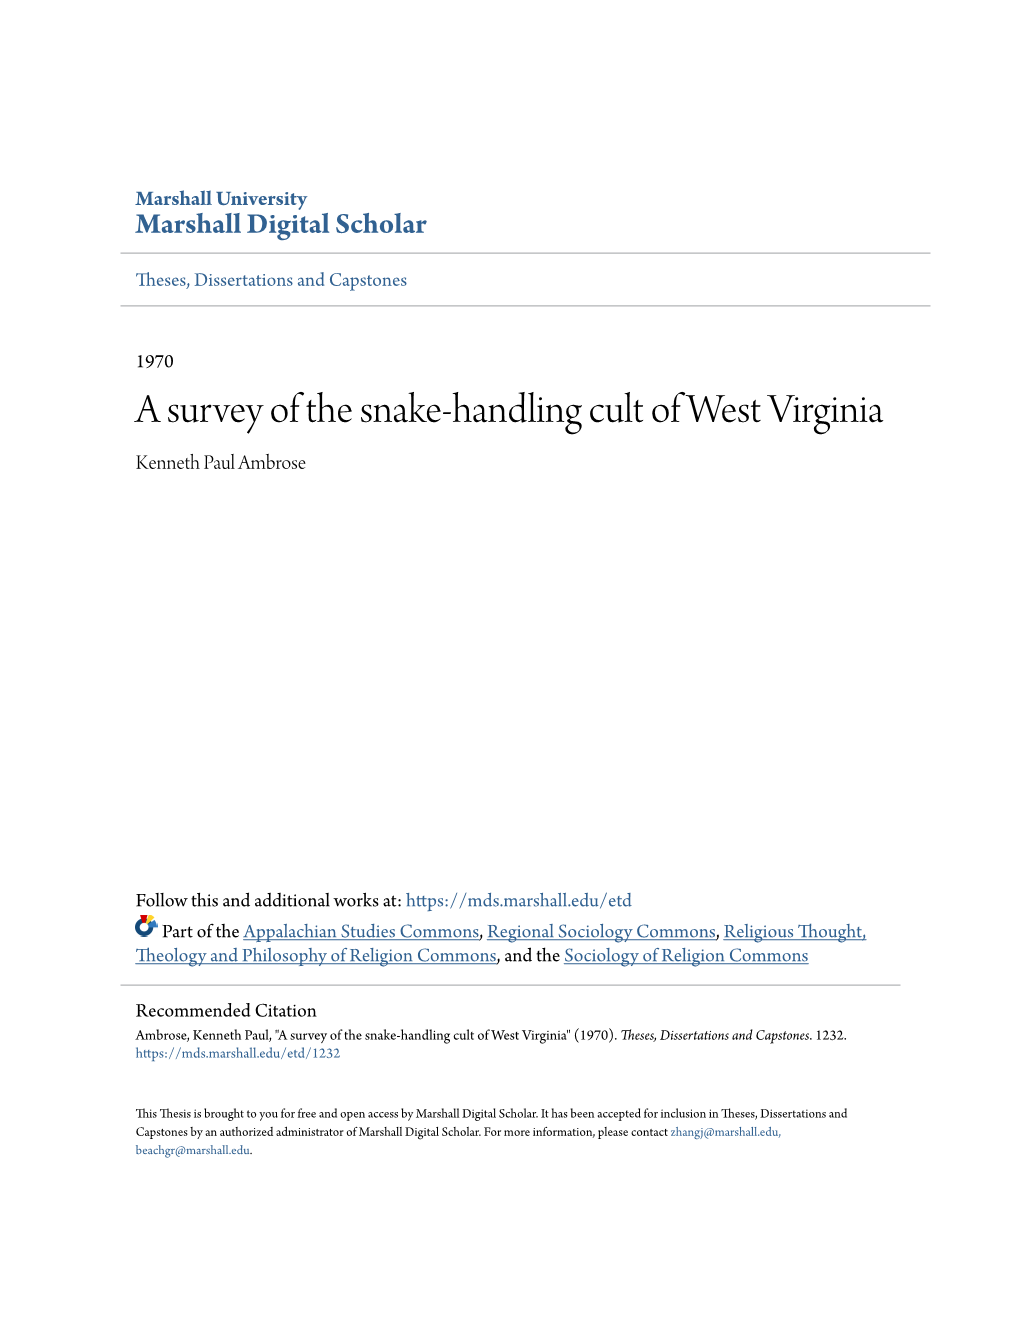 A Survey of the Snake-Handling Cult of West Virginia Kenneth Paul Ambrose